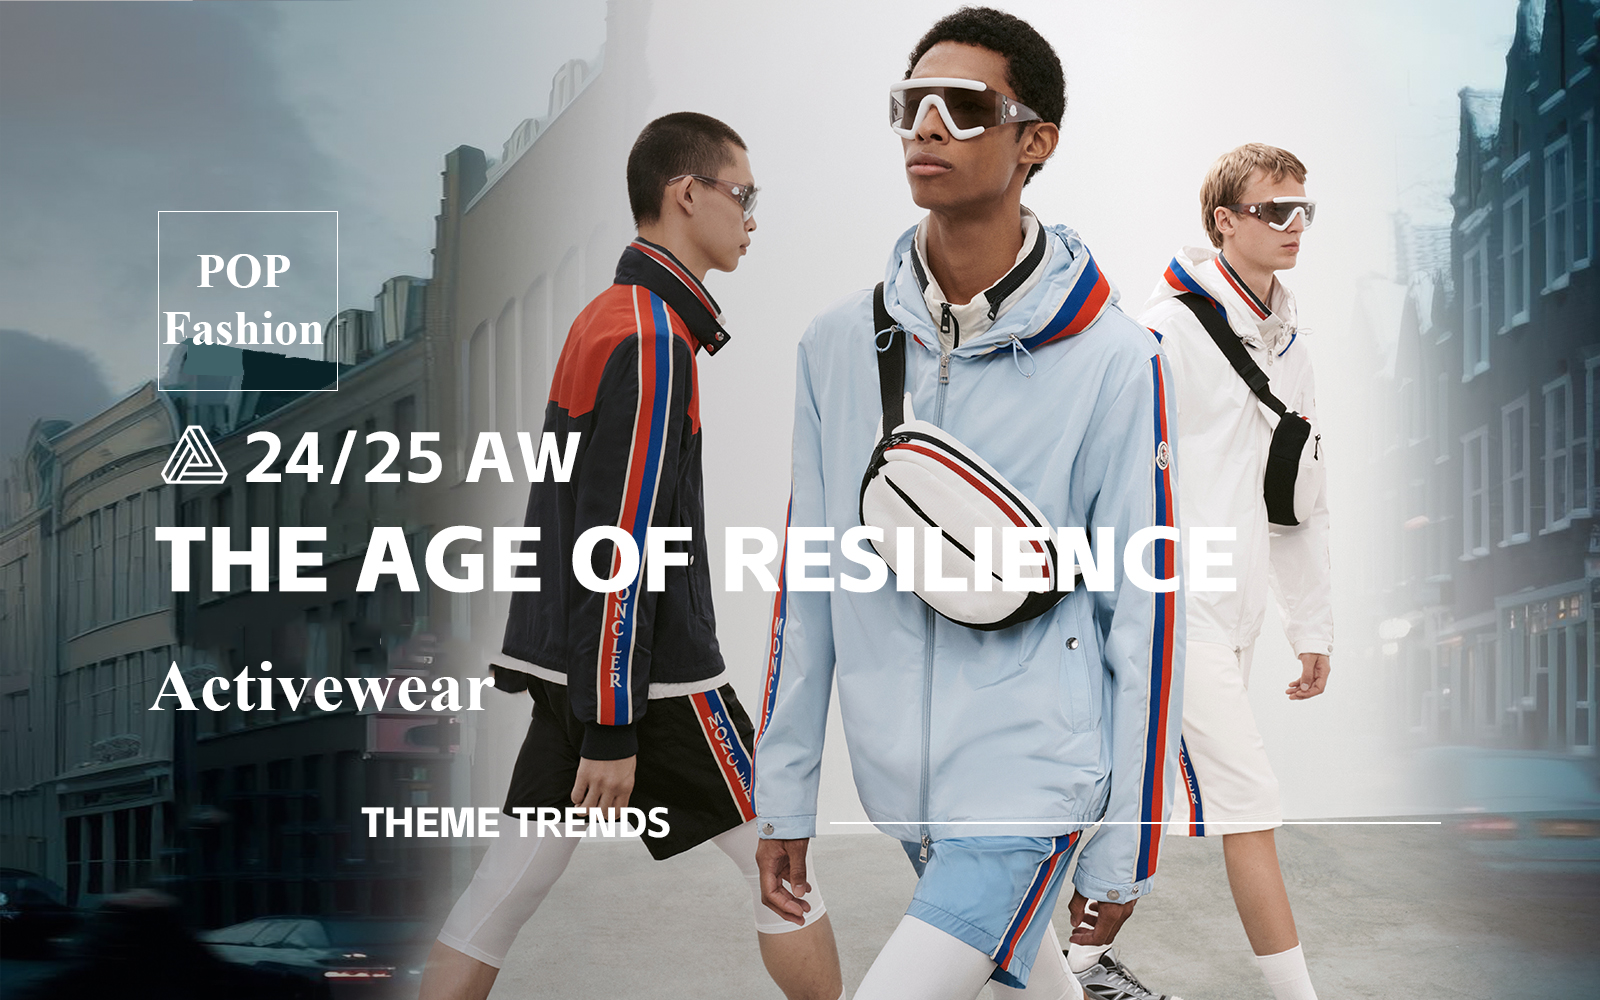 The Age of Resilience -- The A/W 24/25 Activewear Trend